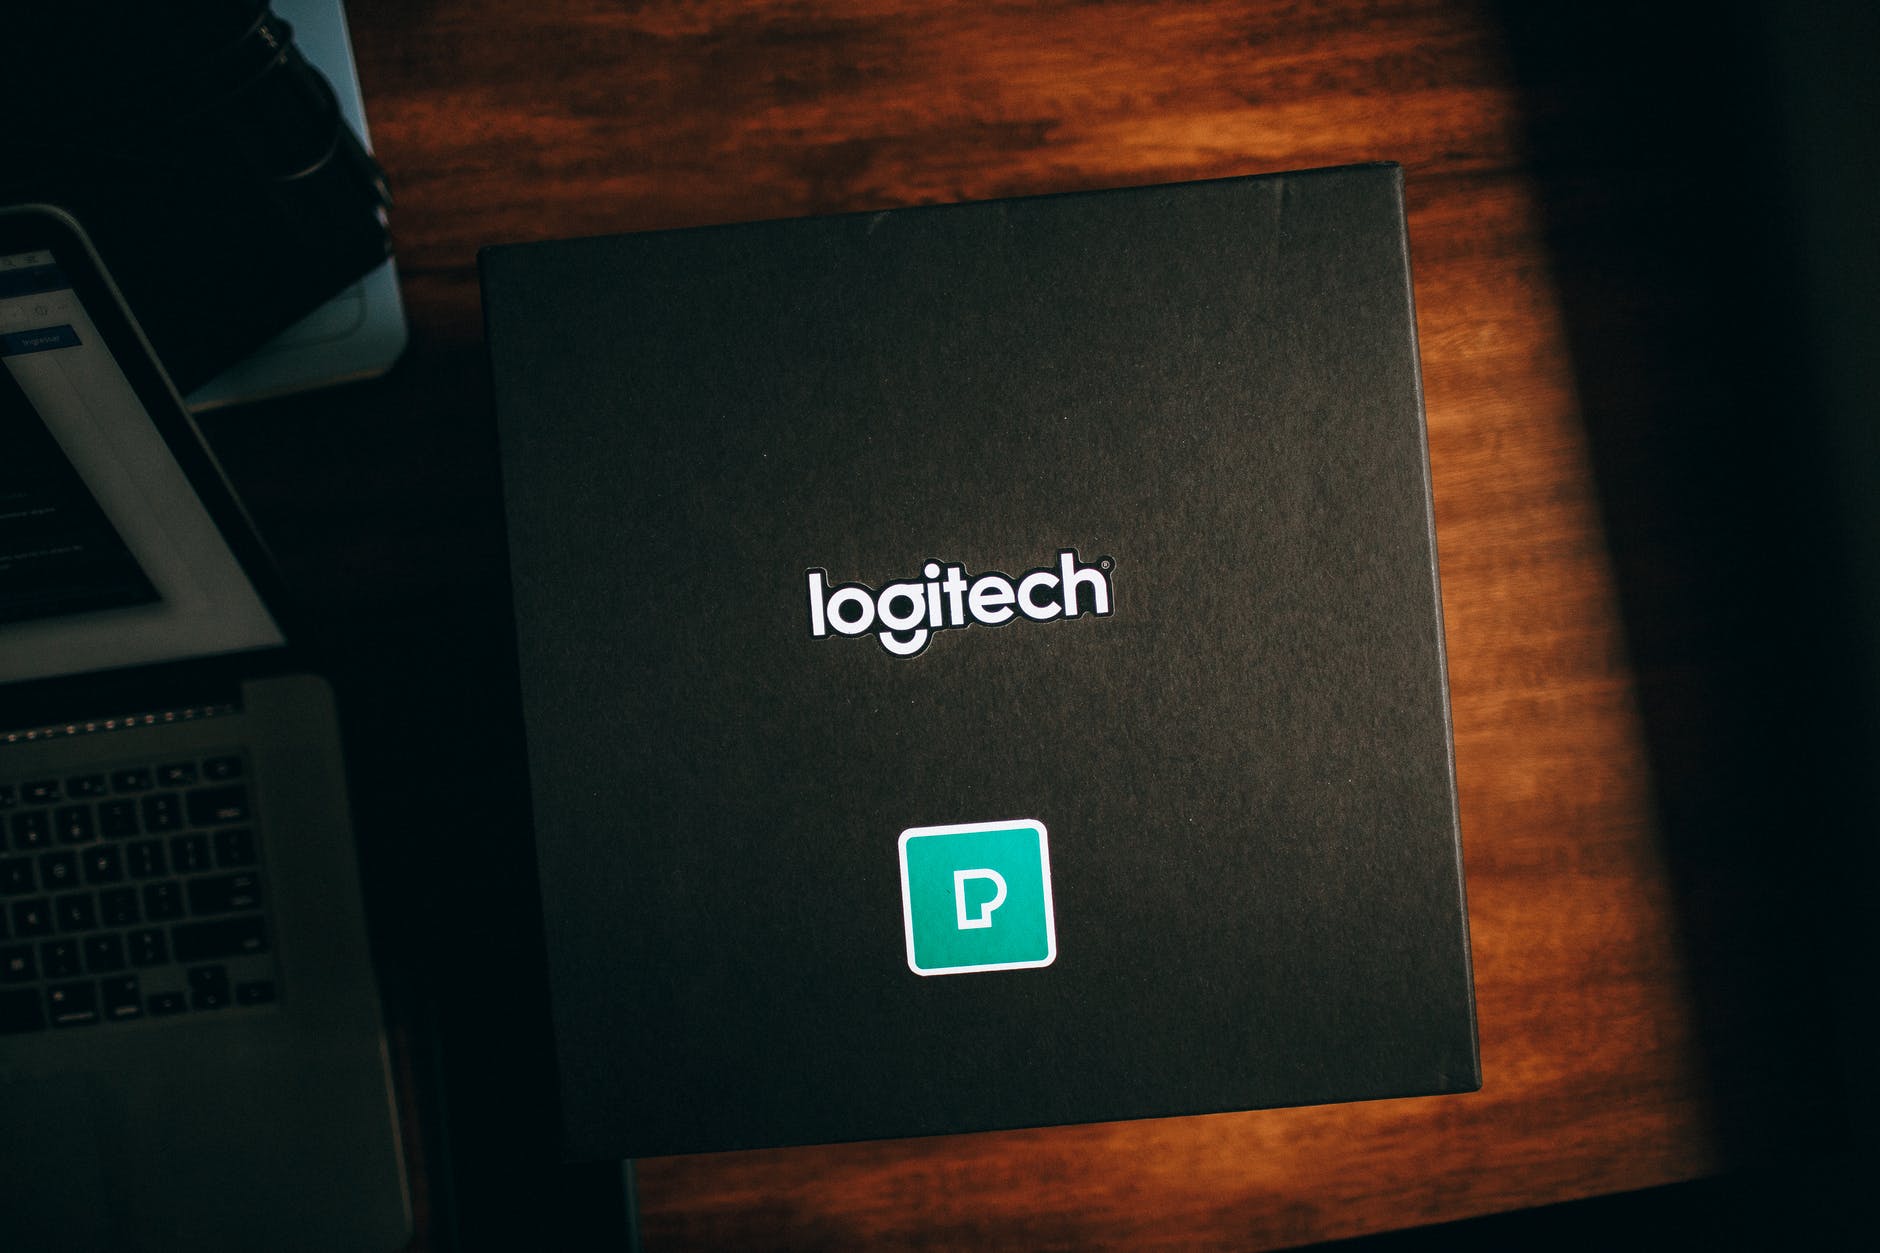 black logitech box on brown wooden table
All In One od Logitech